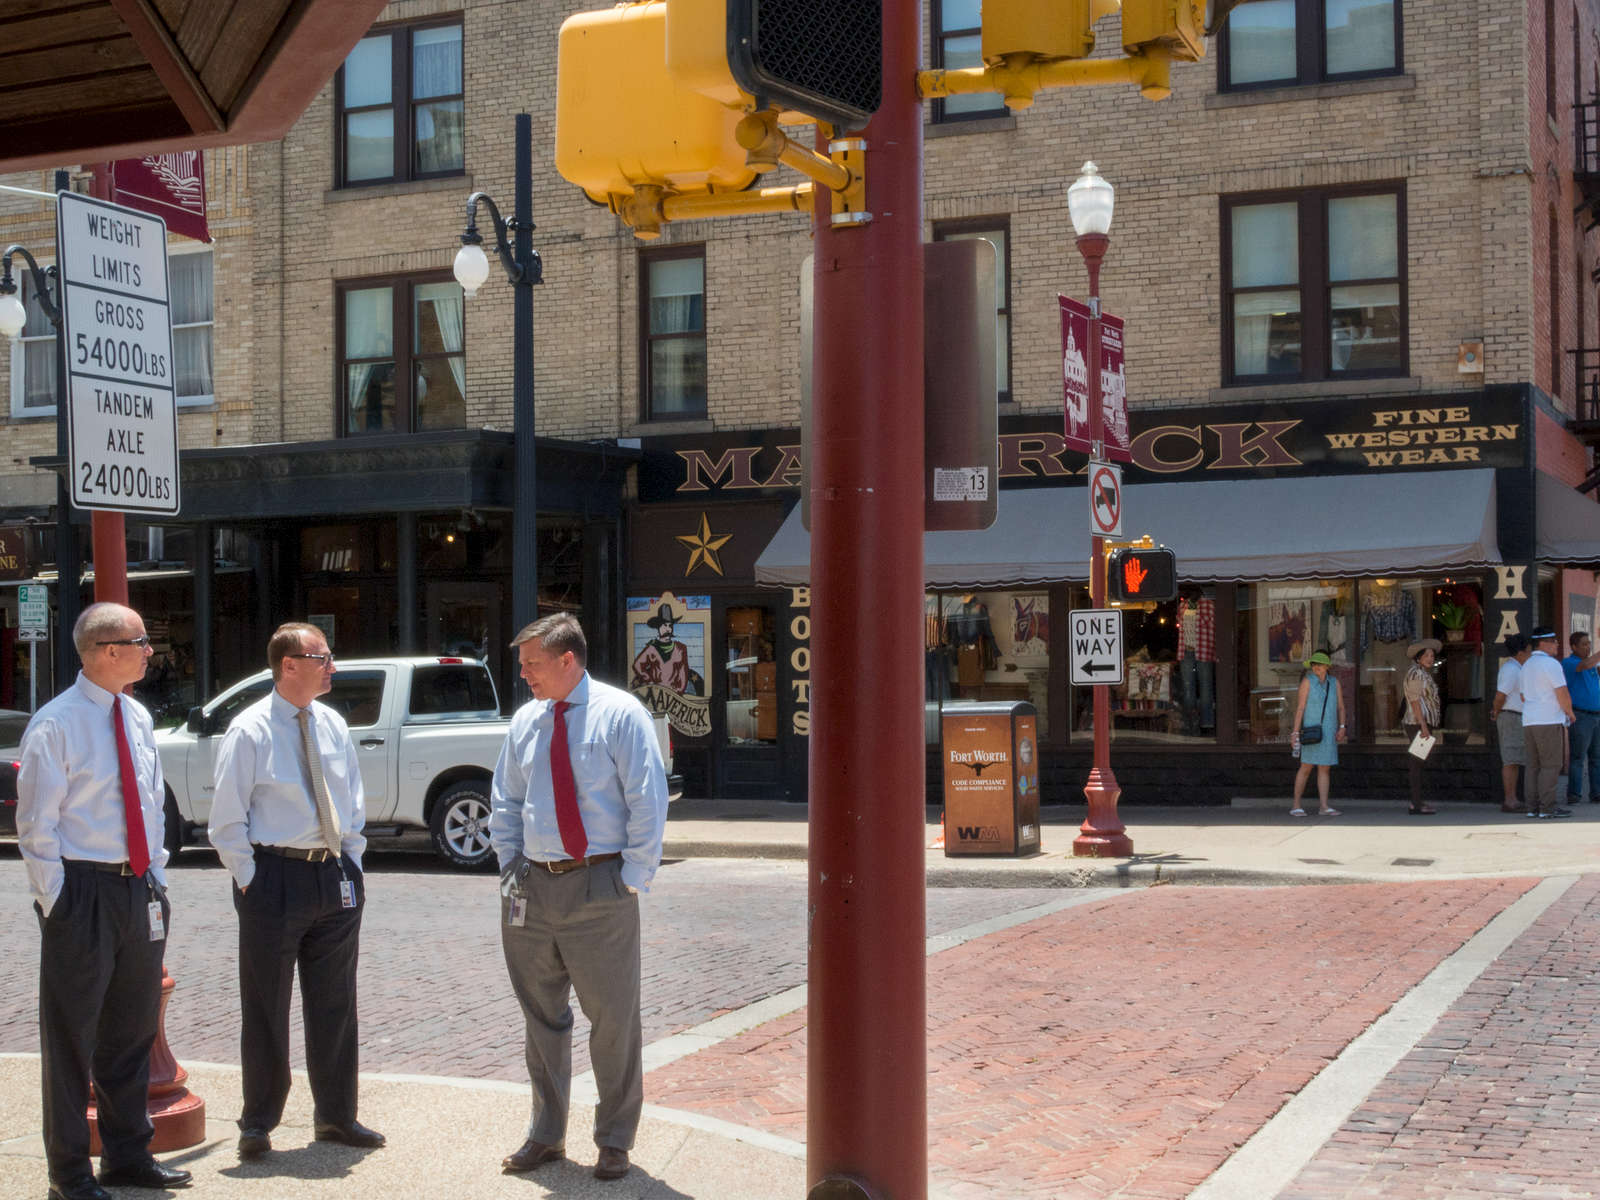 'FINE WESTERN WEAR' Businessmen chat on the corner of a street in the Stockyards district of Fort Worth.The Fort Worth Stockyards is a historic district that is located in Fort Worth, Texas, north of the central business district. The 98-acre (40 ha) district was listed on the National Register of Historic Places as Fort Worth Stockyards Historic District in 1976.They are a former livestock market which operated under various owners from 1866.Dallas is a major city in Texas and is the largest urban center of the fourth most populous metropolitan area in the United States. The city ranks ninth in the U.S. and third in Texas after Houston and San Antonio. The city's prominence arose from its historical importance as a center for the oil and cotton industries, and its position along numerous railroad lines.For two weeks in the summer of 2015, photographer Peter Dench visited Dallas to document the metroplex in his epic reportage, DENCH DOES DALLAS.Photographed using an Olympus E-M5 Mark II©Peter Dench/Getty Images Reportage